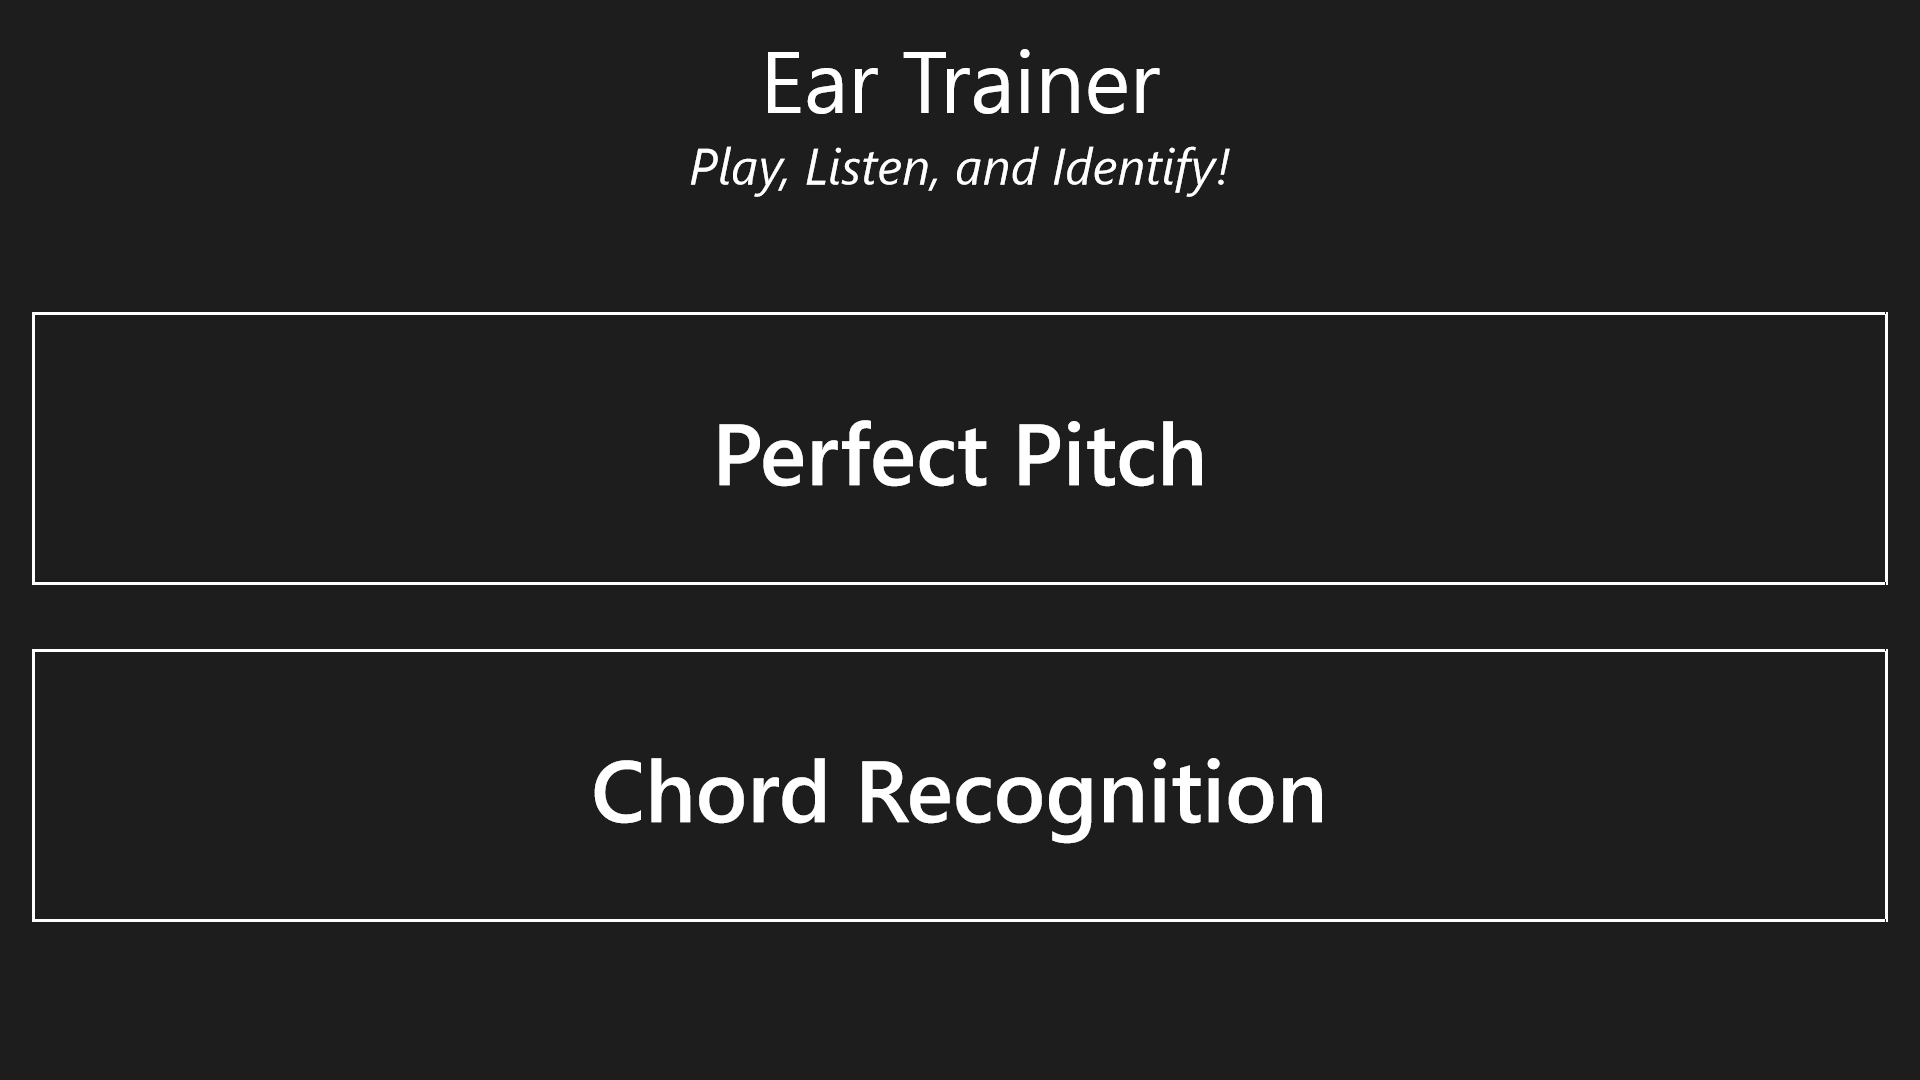 Develop your ear as a musician